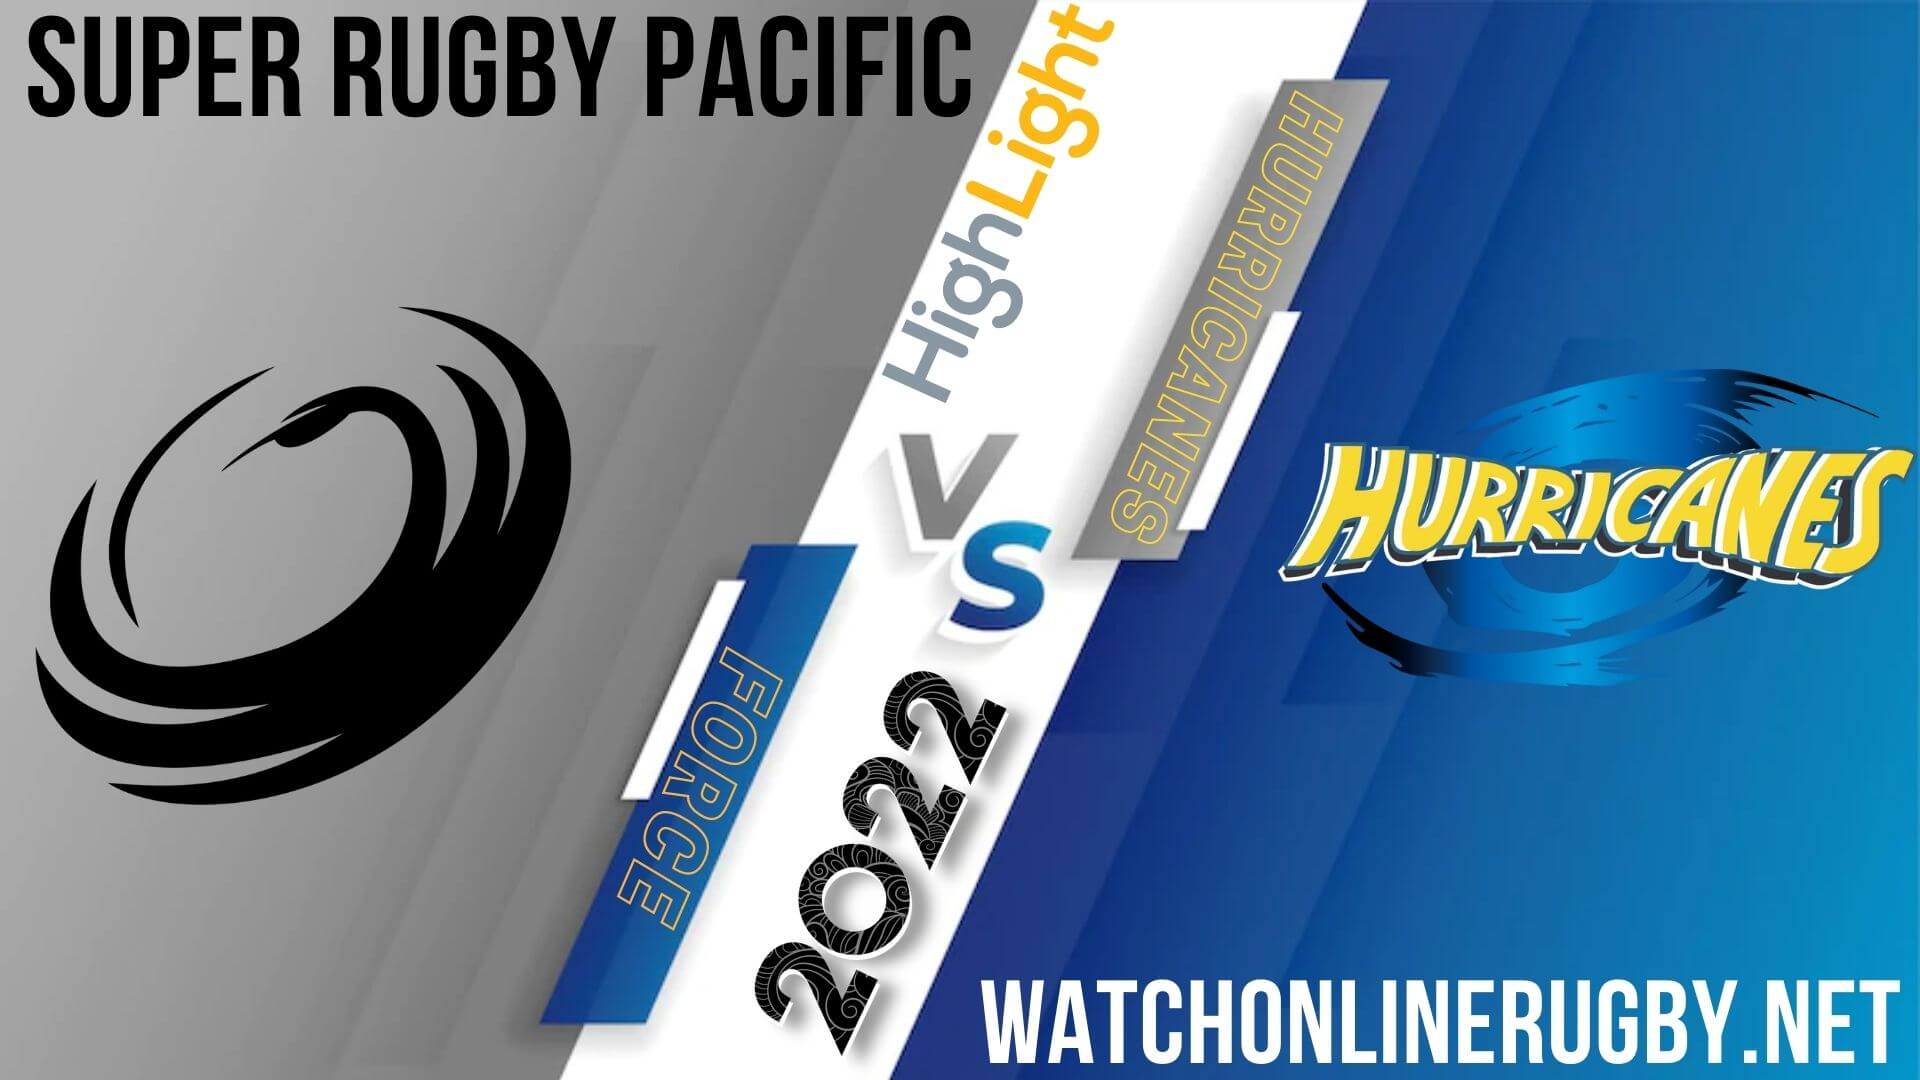 Western Force Vs Hurricanes Super Rugby Pacific 2022 RD 15